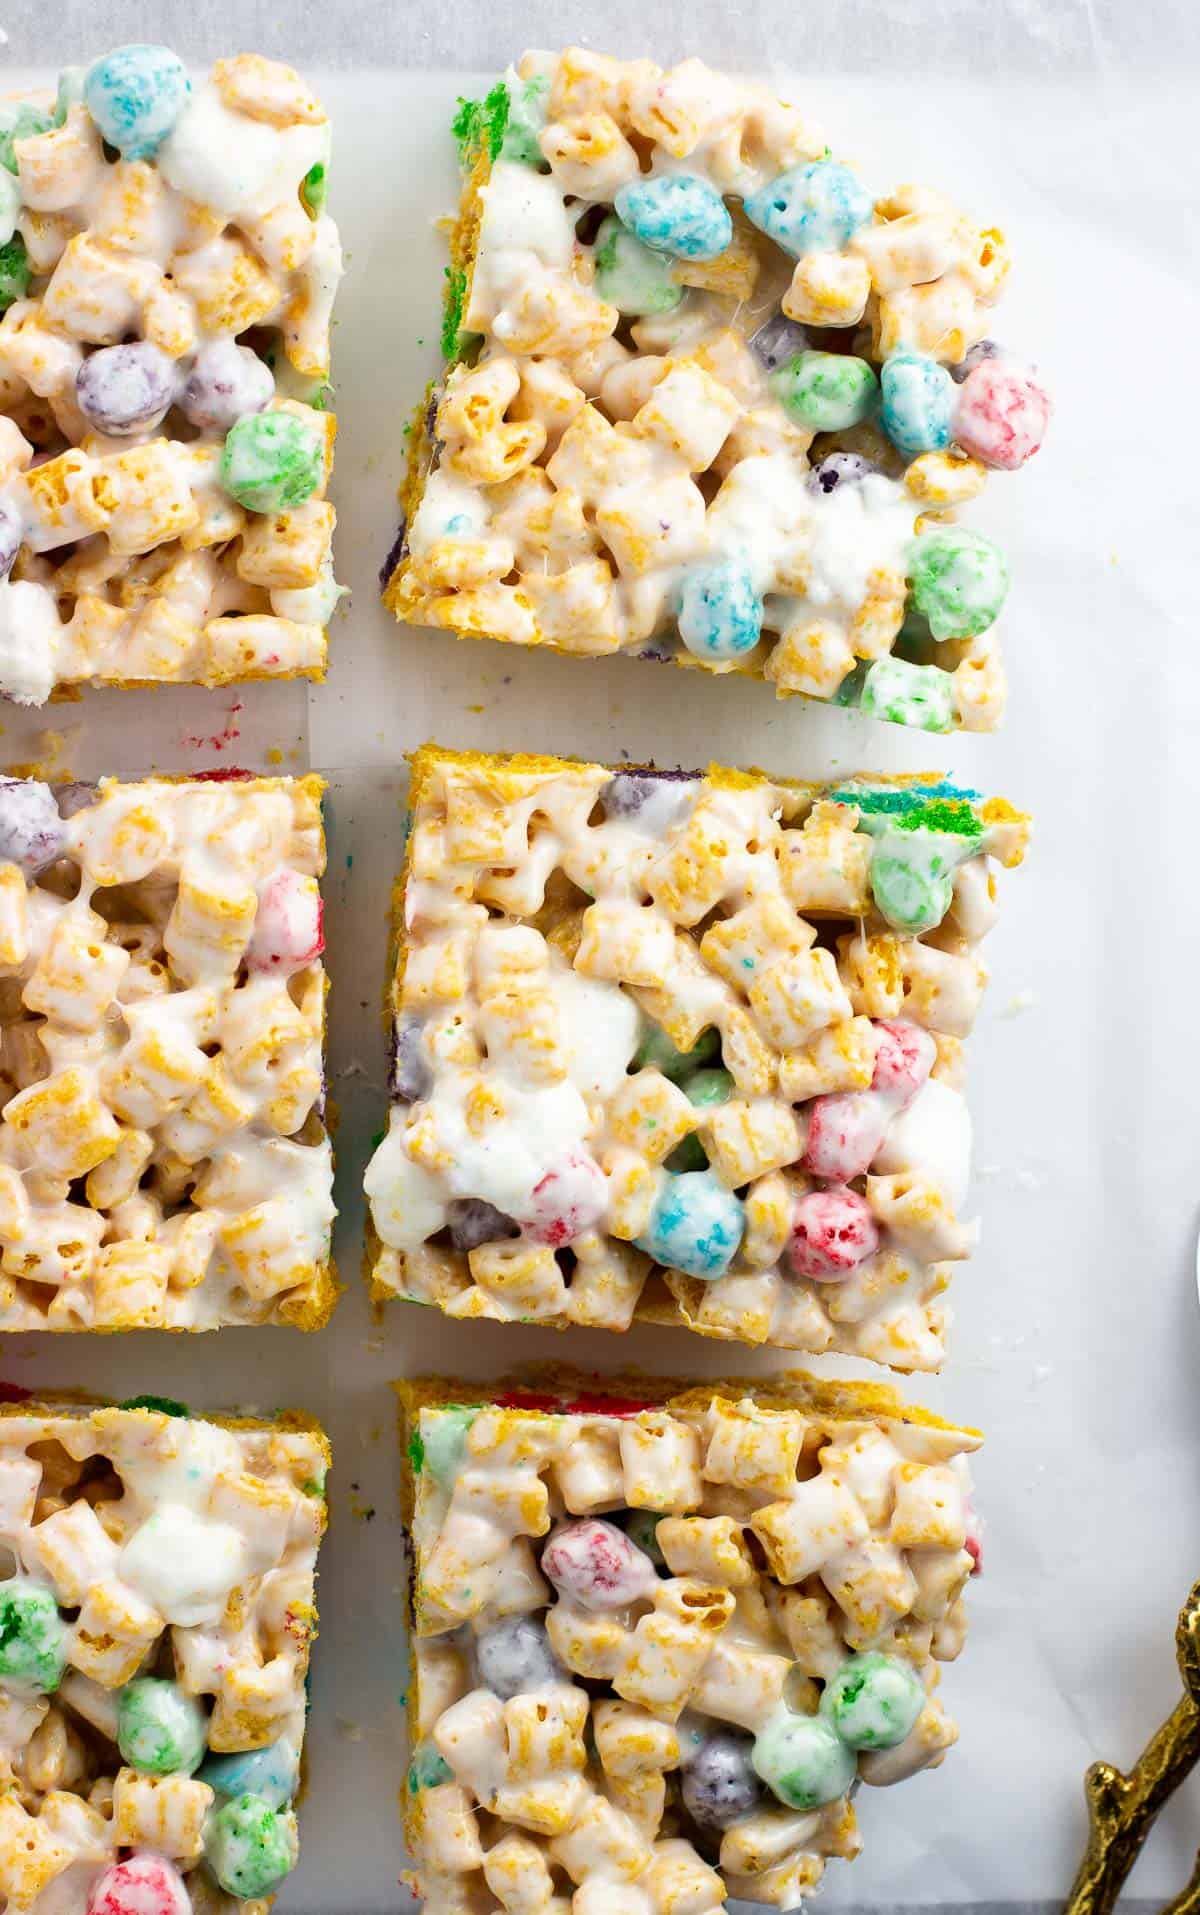 Cap'n crunch cereal treats sliced into squares.